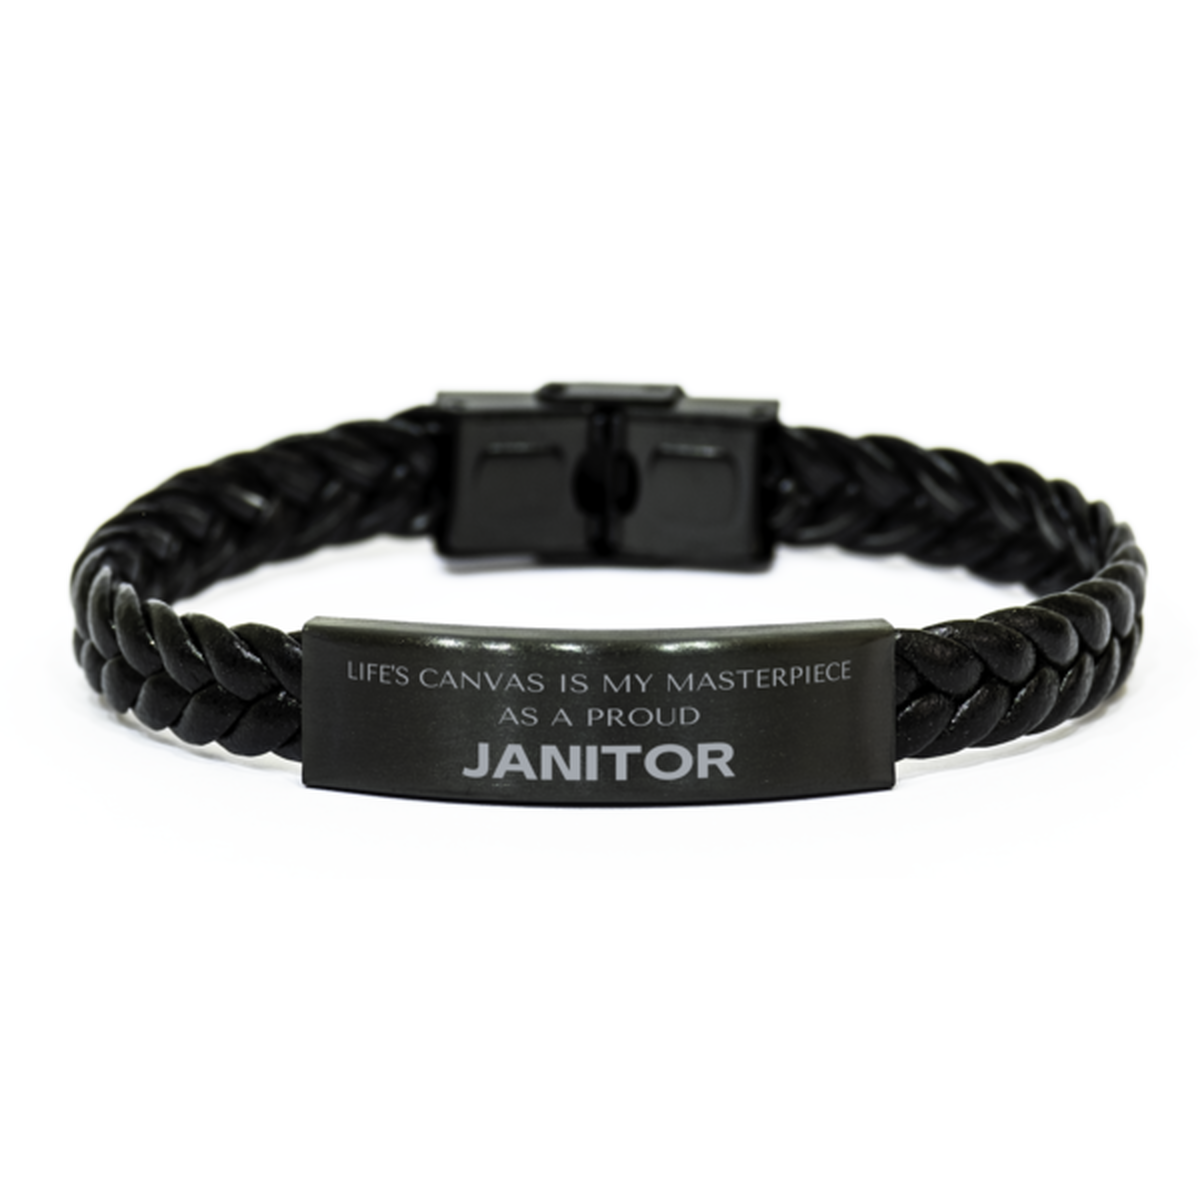 Proud Janitor Gifts, Life's canvas is my masterpiece, Epic Birthday Christmas Unique Braided Leather Bracelet For Janitor, Coworkers, Men, Women, Friends